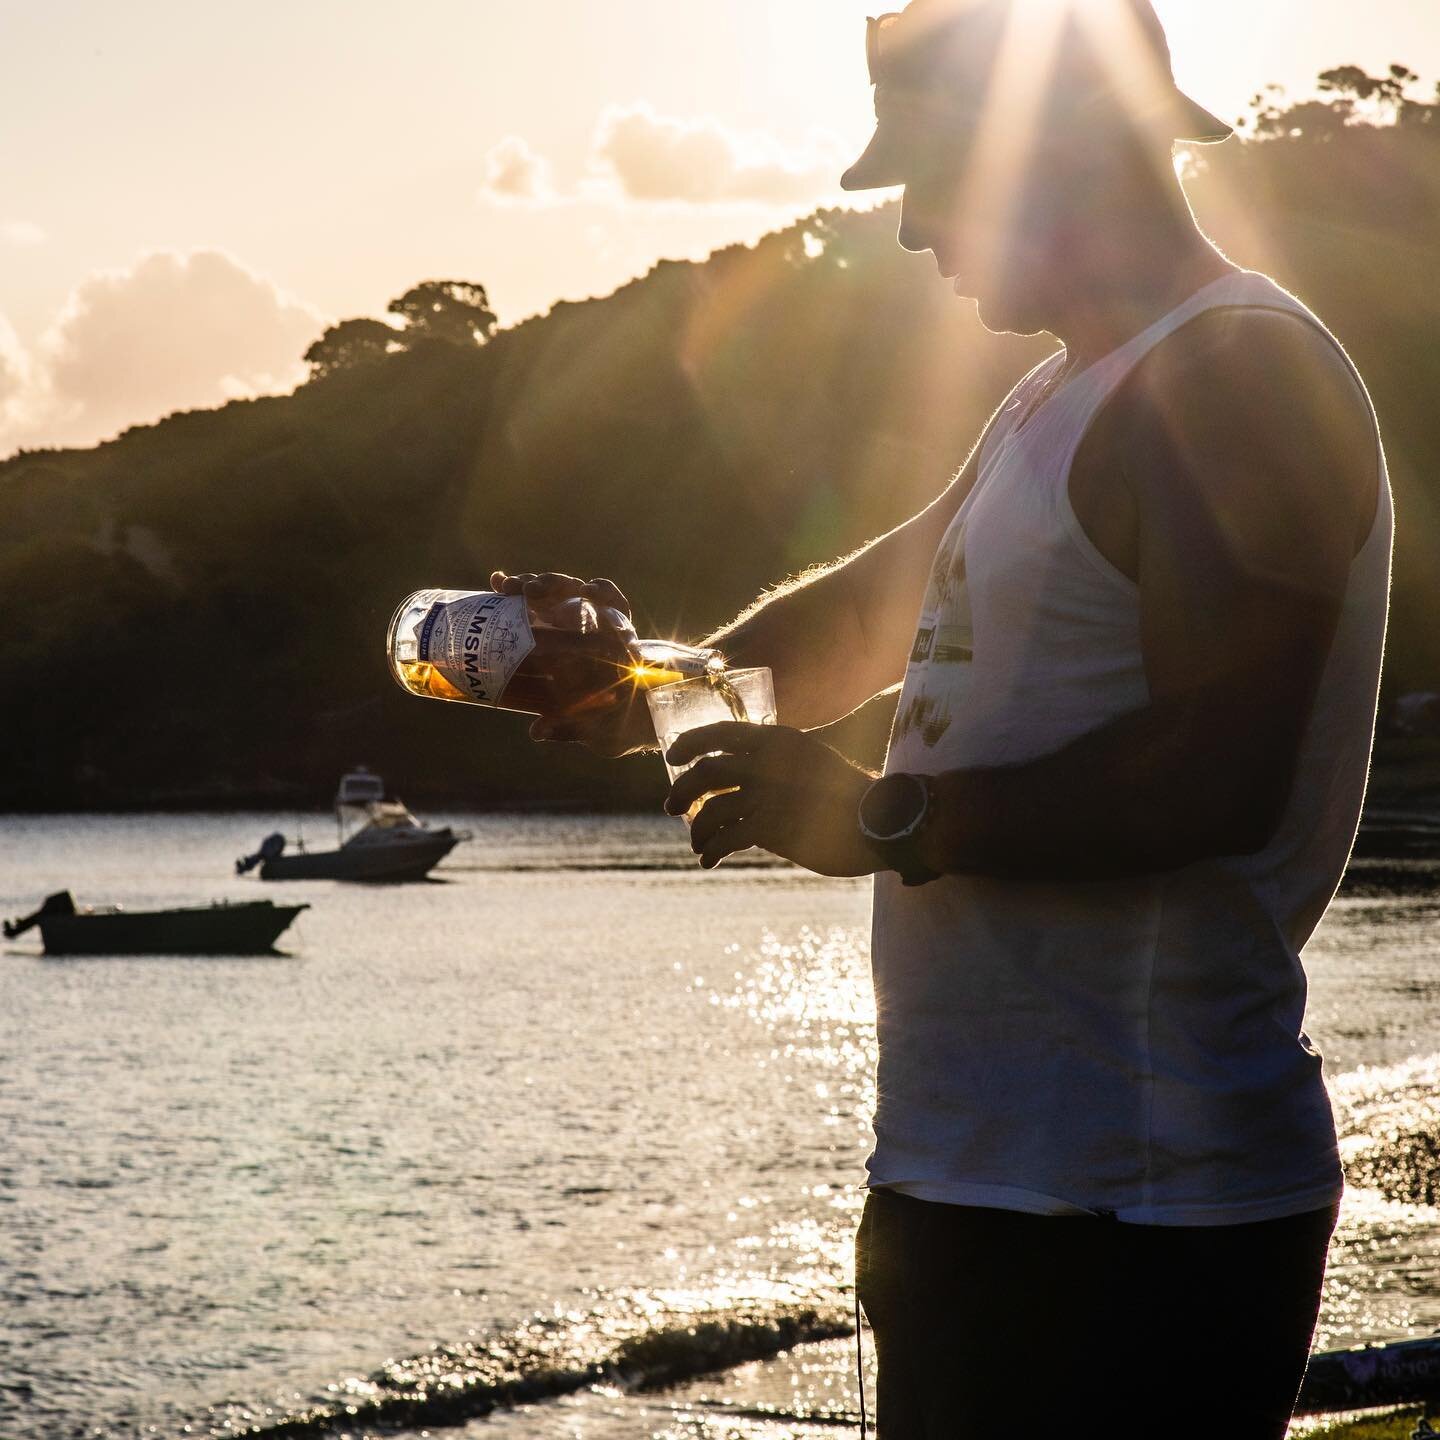 Indulging in a glass of Helmsman Rum after a day spent on the water, is what we look forward to the most! Enjoy the taste, relish the moment, and embrace the seaside adventures.